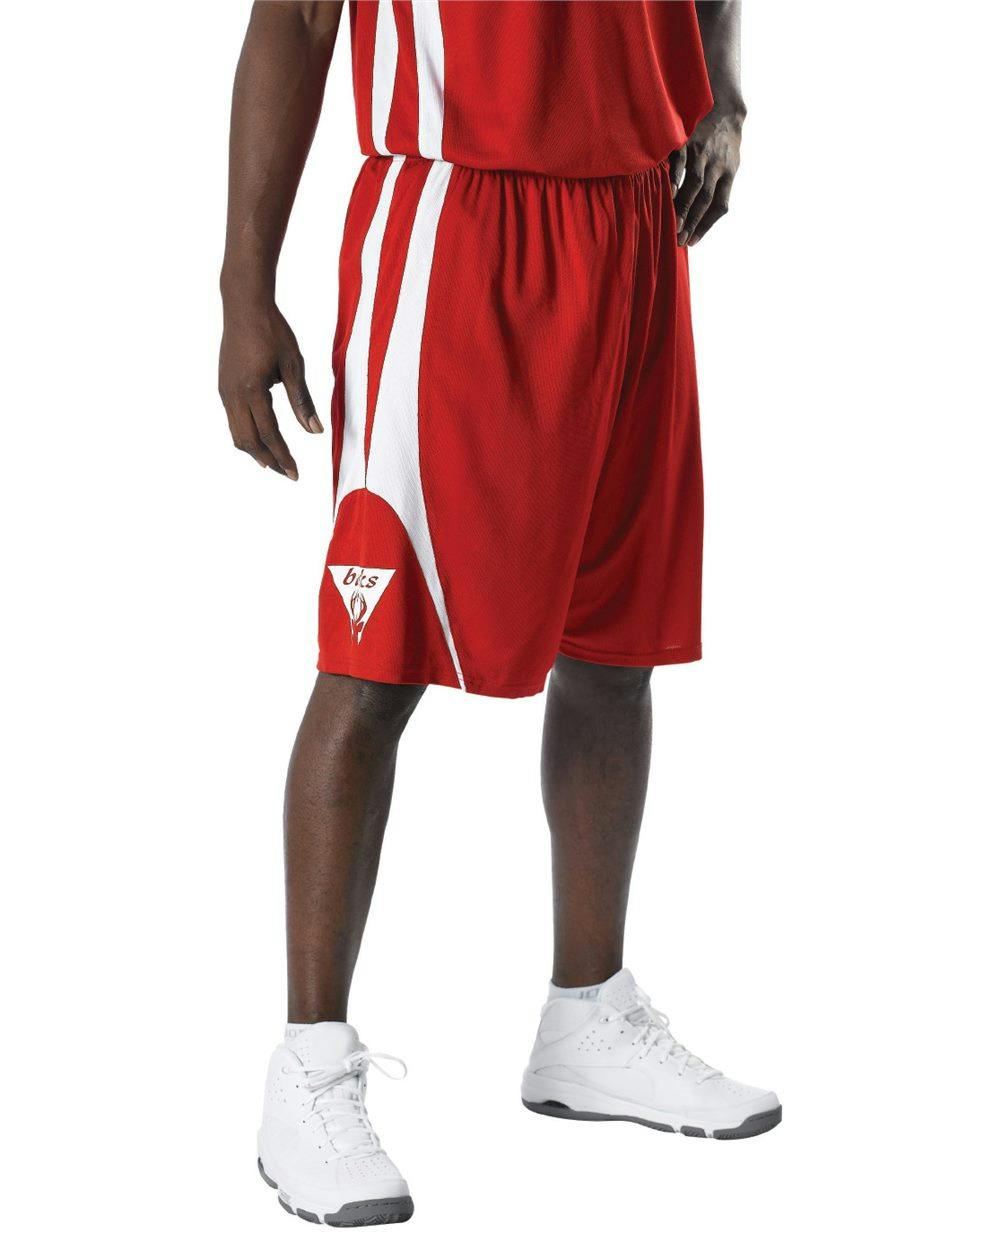 Image for Youth Reversible Basketball Shorts - 54MMPY